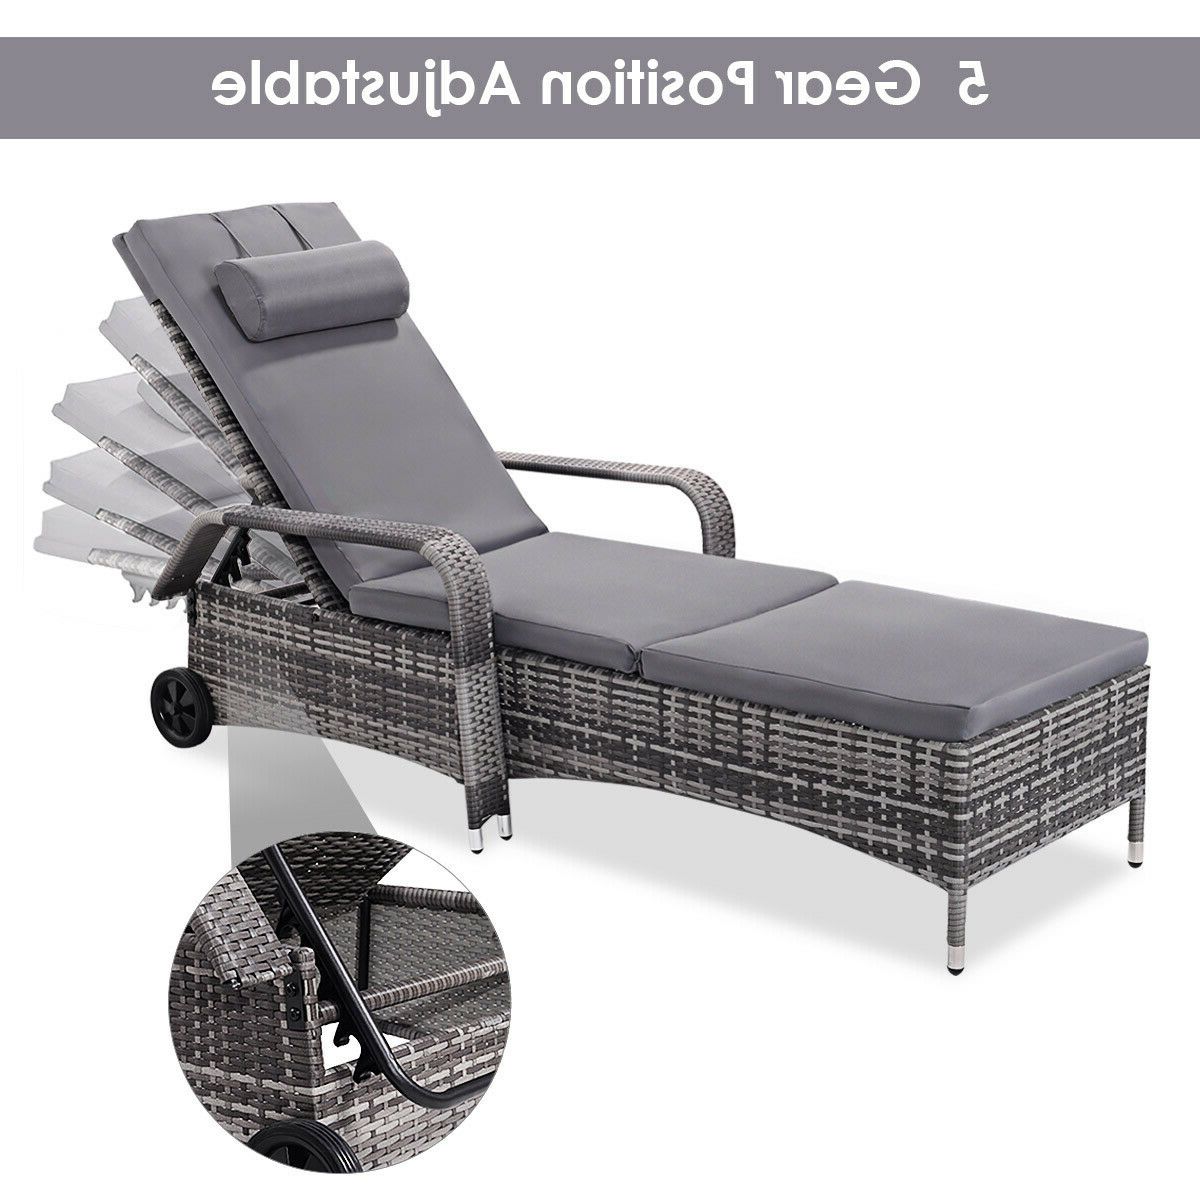 Cart Wheel Adjustable Chaise Lounge Chairs Inside Popular Costway Outdoor Chaise Lounge Chair Recliner Cushioned Patio Furni  Adjustable W/wheels (View 9 of 25)